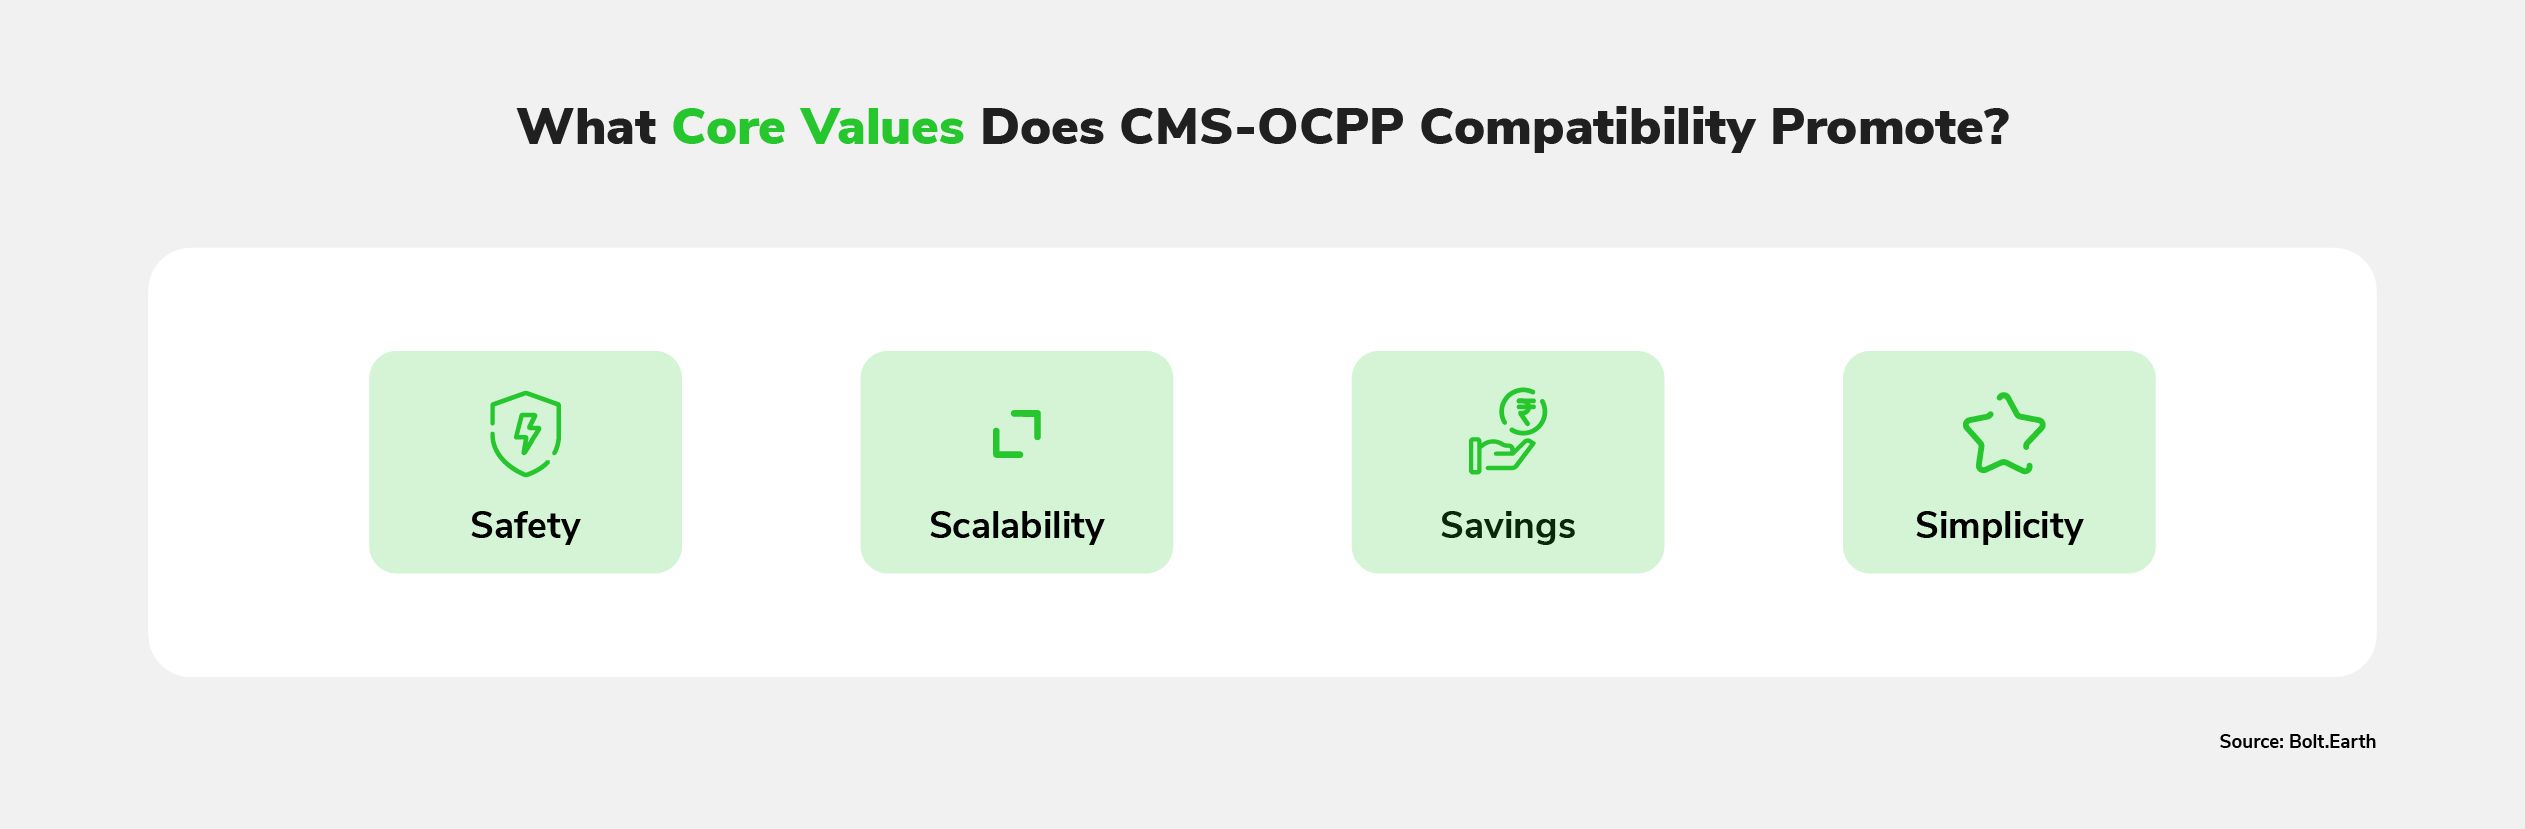 A graphic listing the core values which CMS-OCPP compatibility promotes